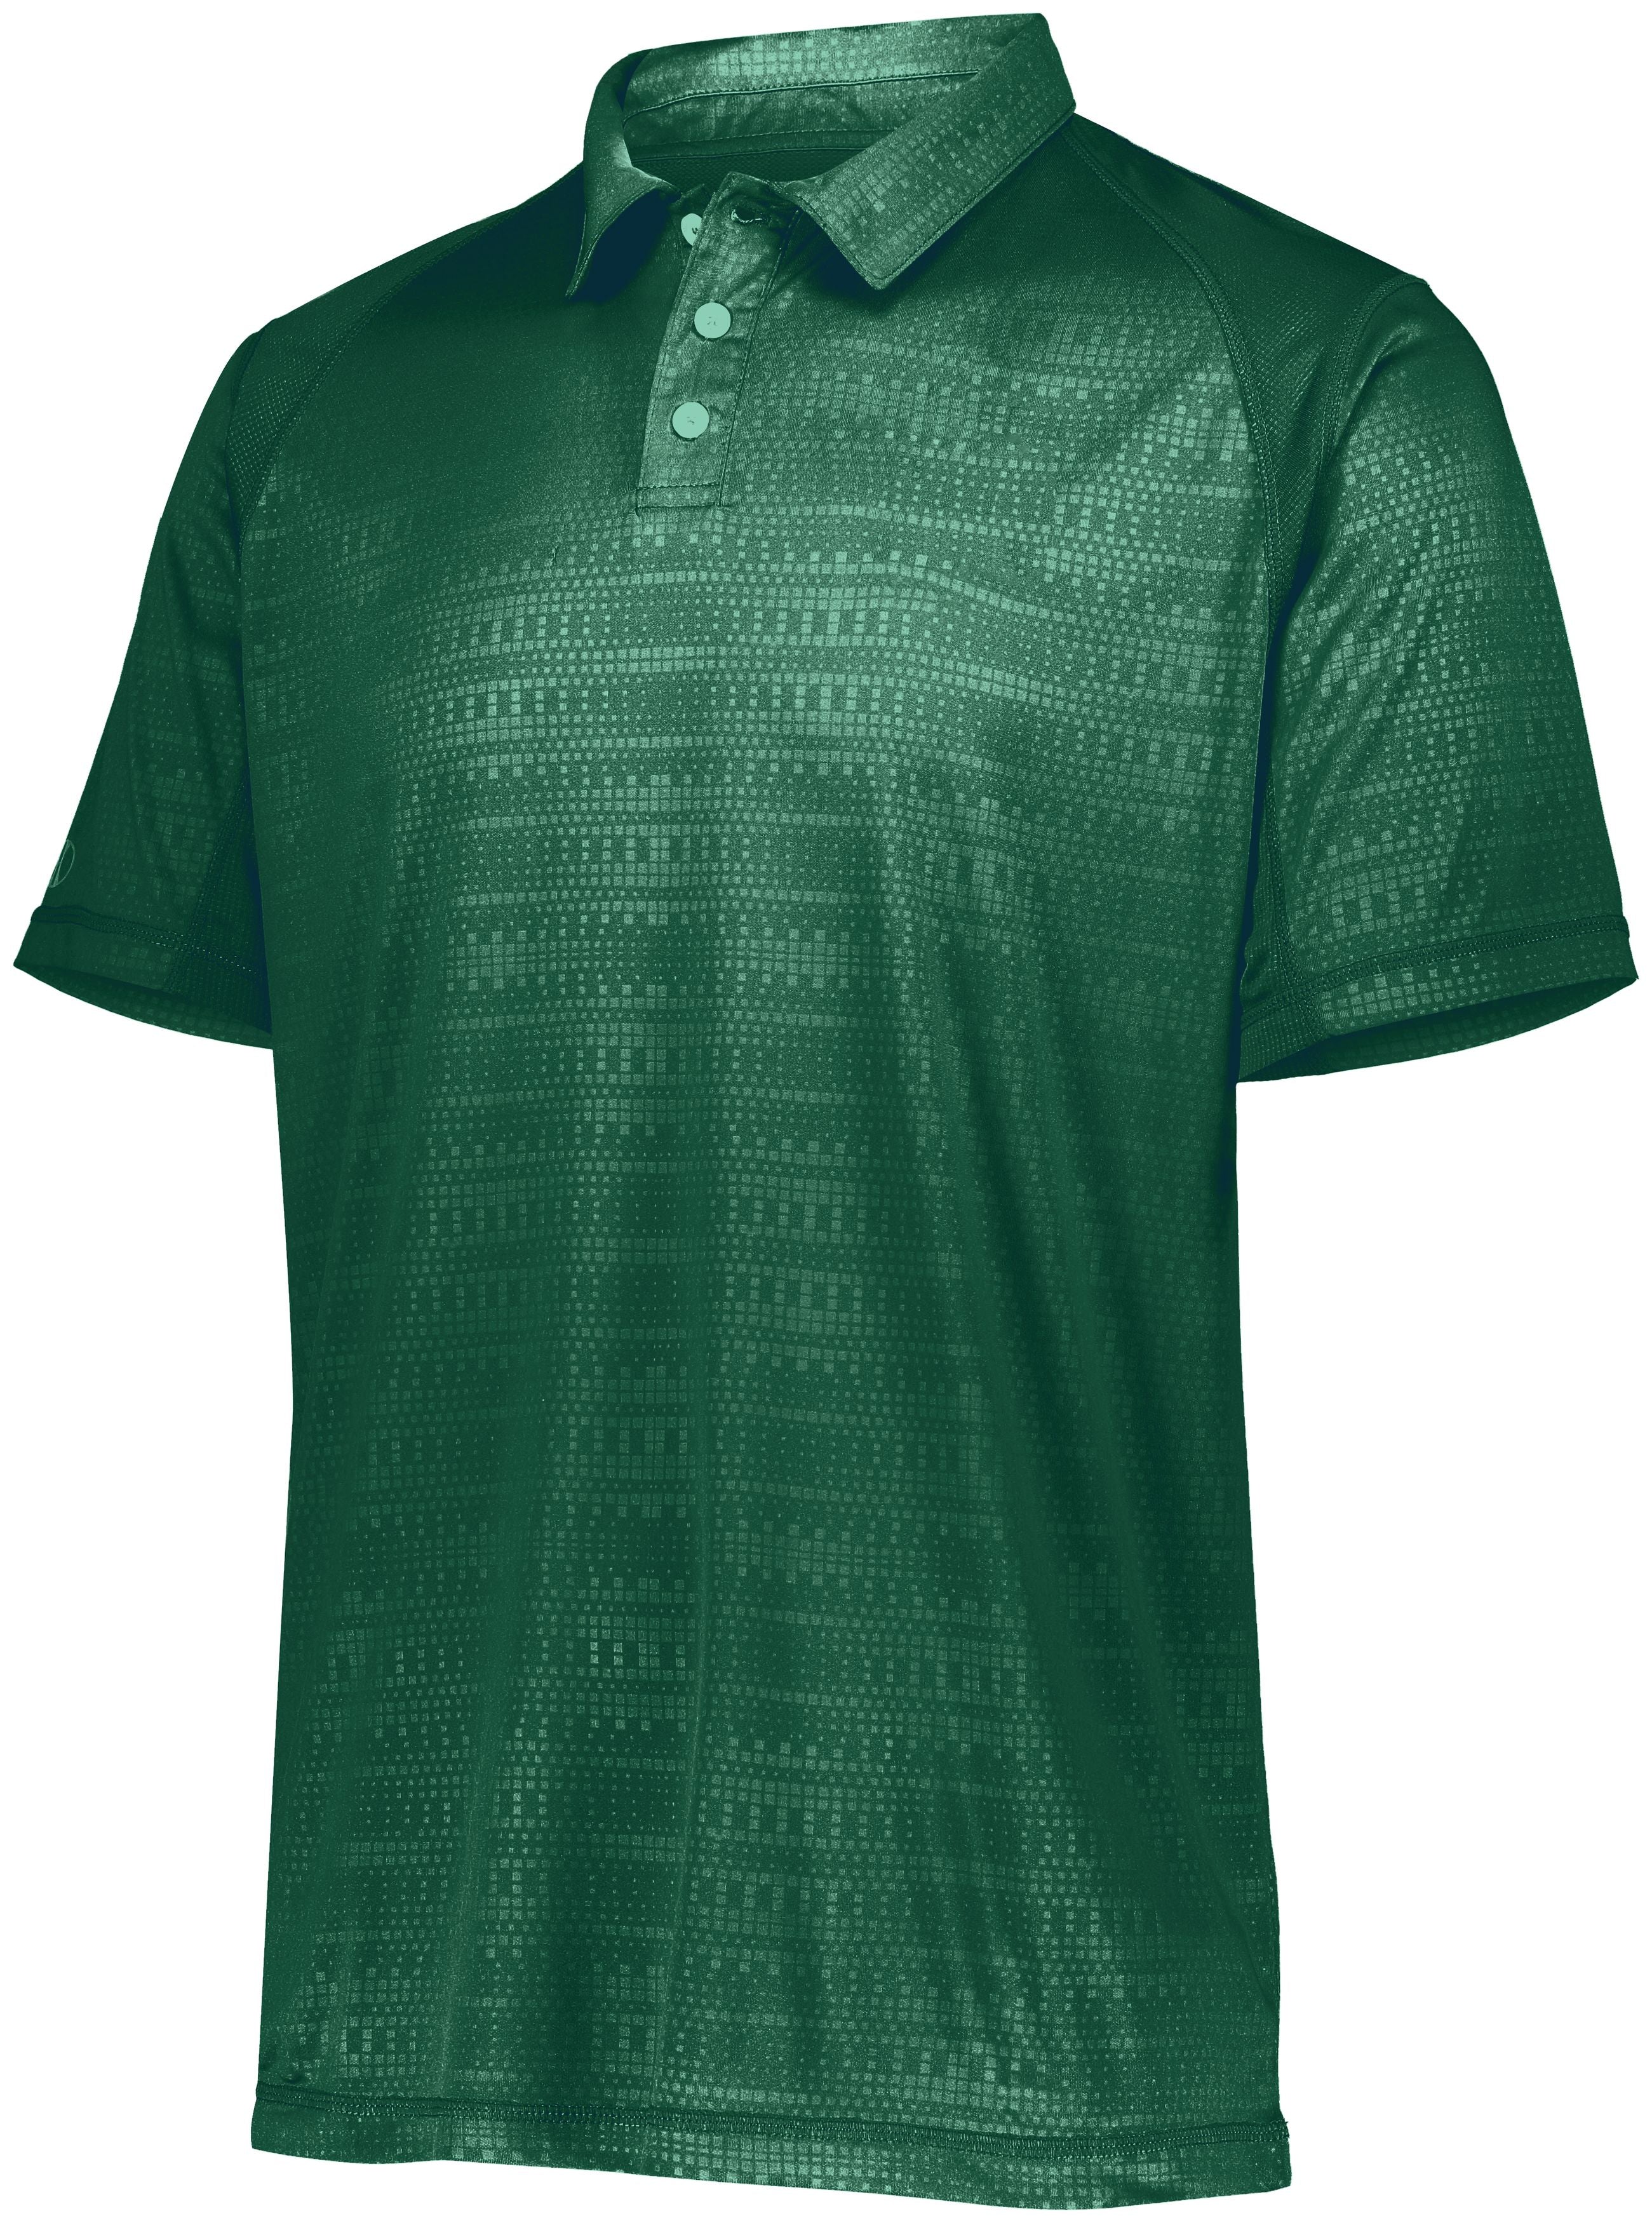 Holloway Converge Polo in Forest  -Part of the Adult, Adult-Polos, Polos, Holloway, Shirts, Converge-Collection product lines at KanaleyCreations.com